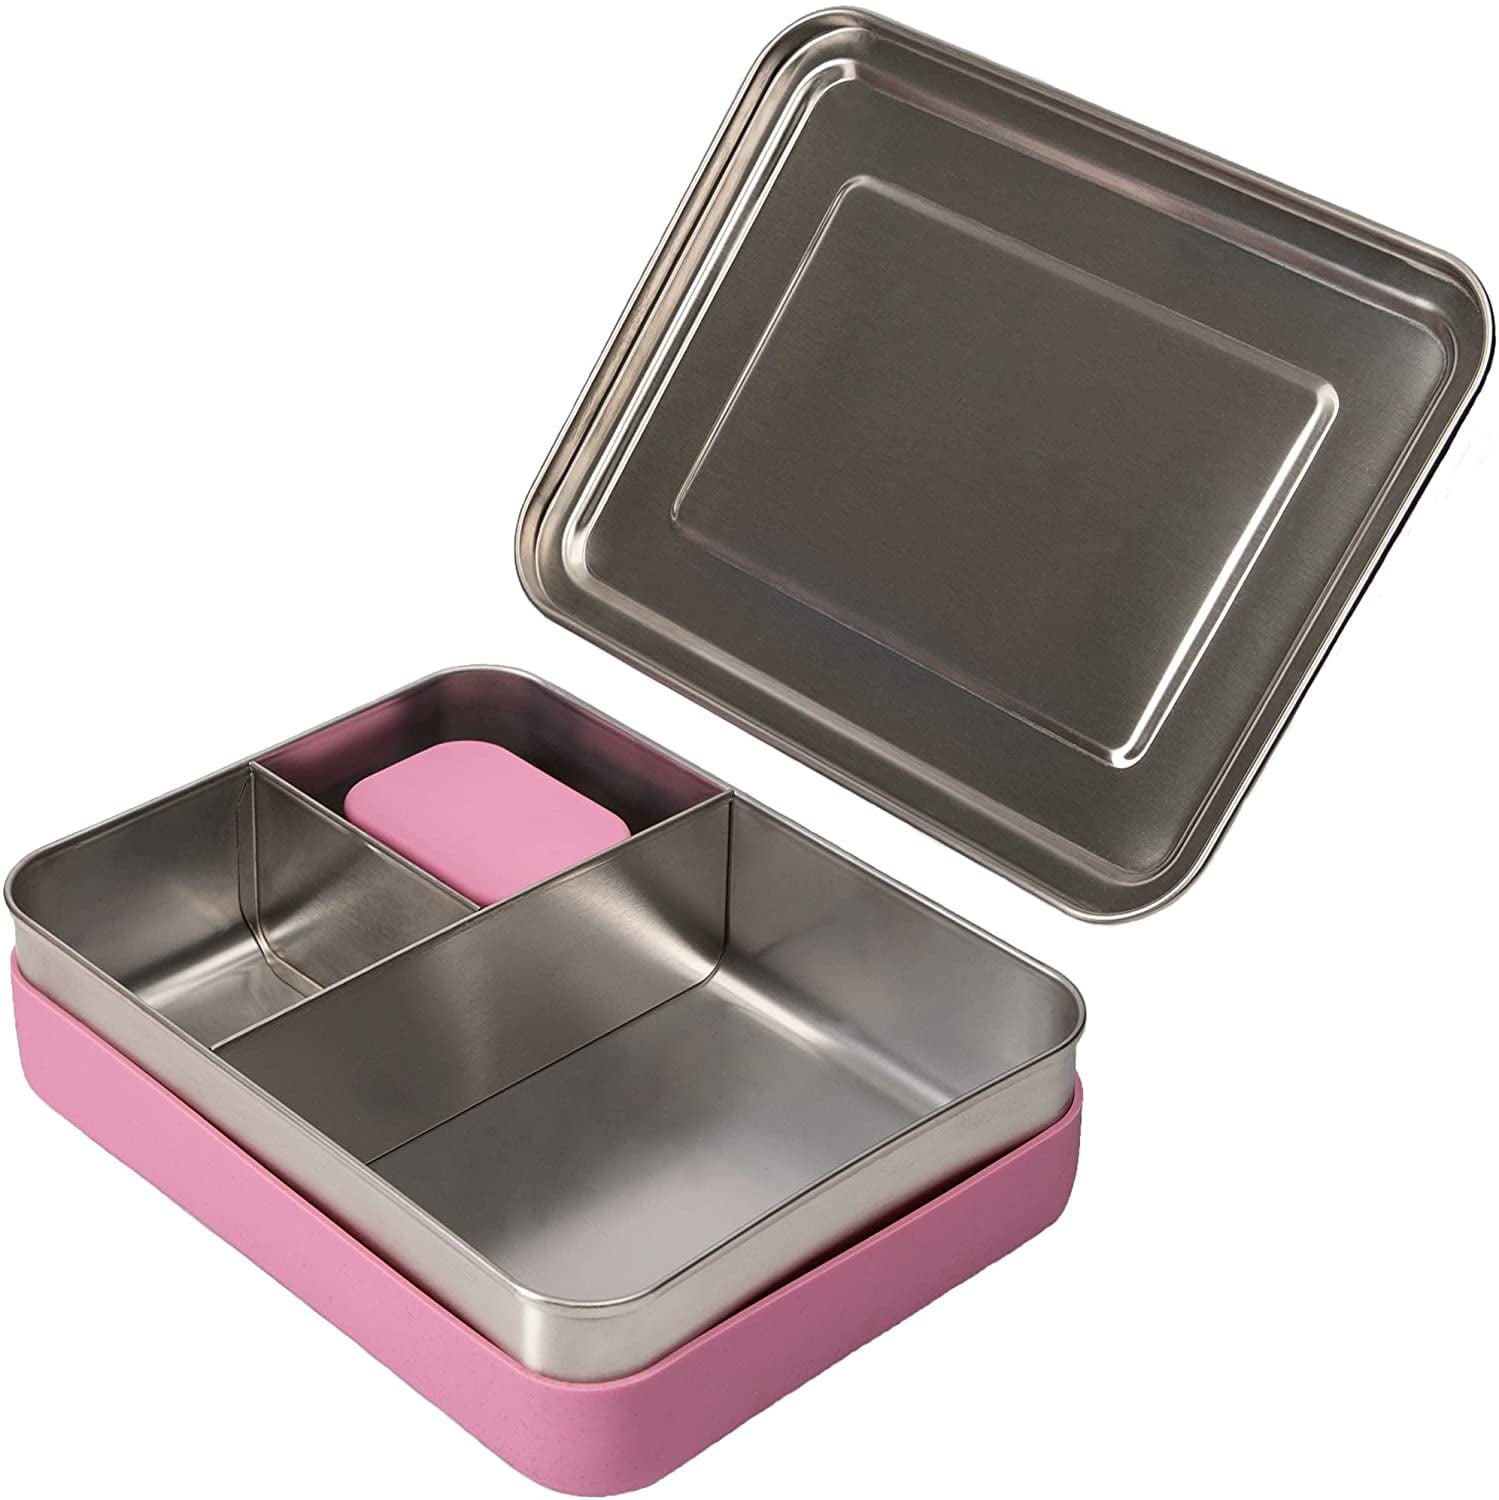 3-in-1 Stainless Steel Bento Box For Kids & Adults with Snack Pod - Holds 6  Cups of Food, 100% Crack-Resistant, Secure…